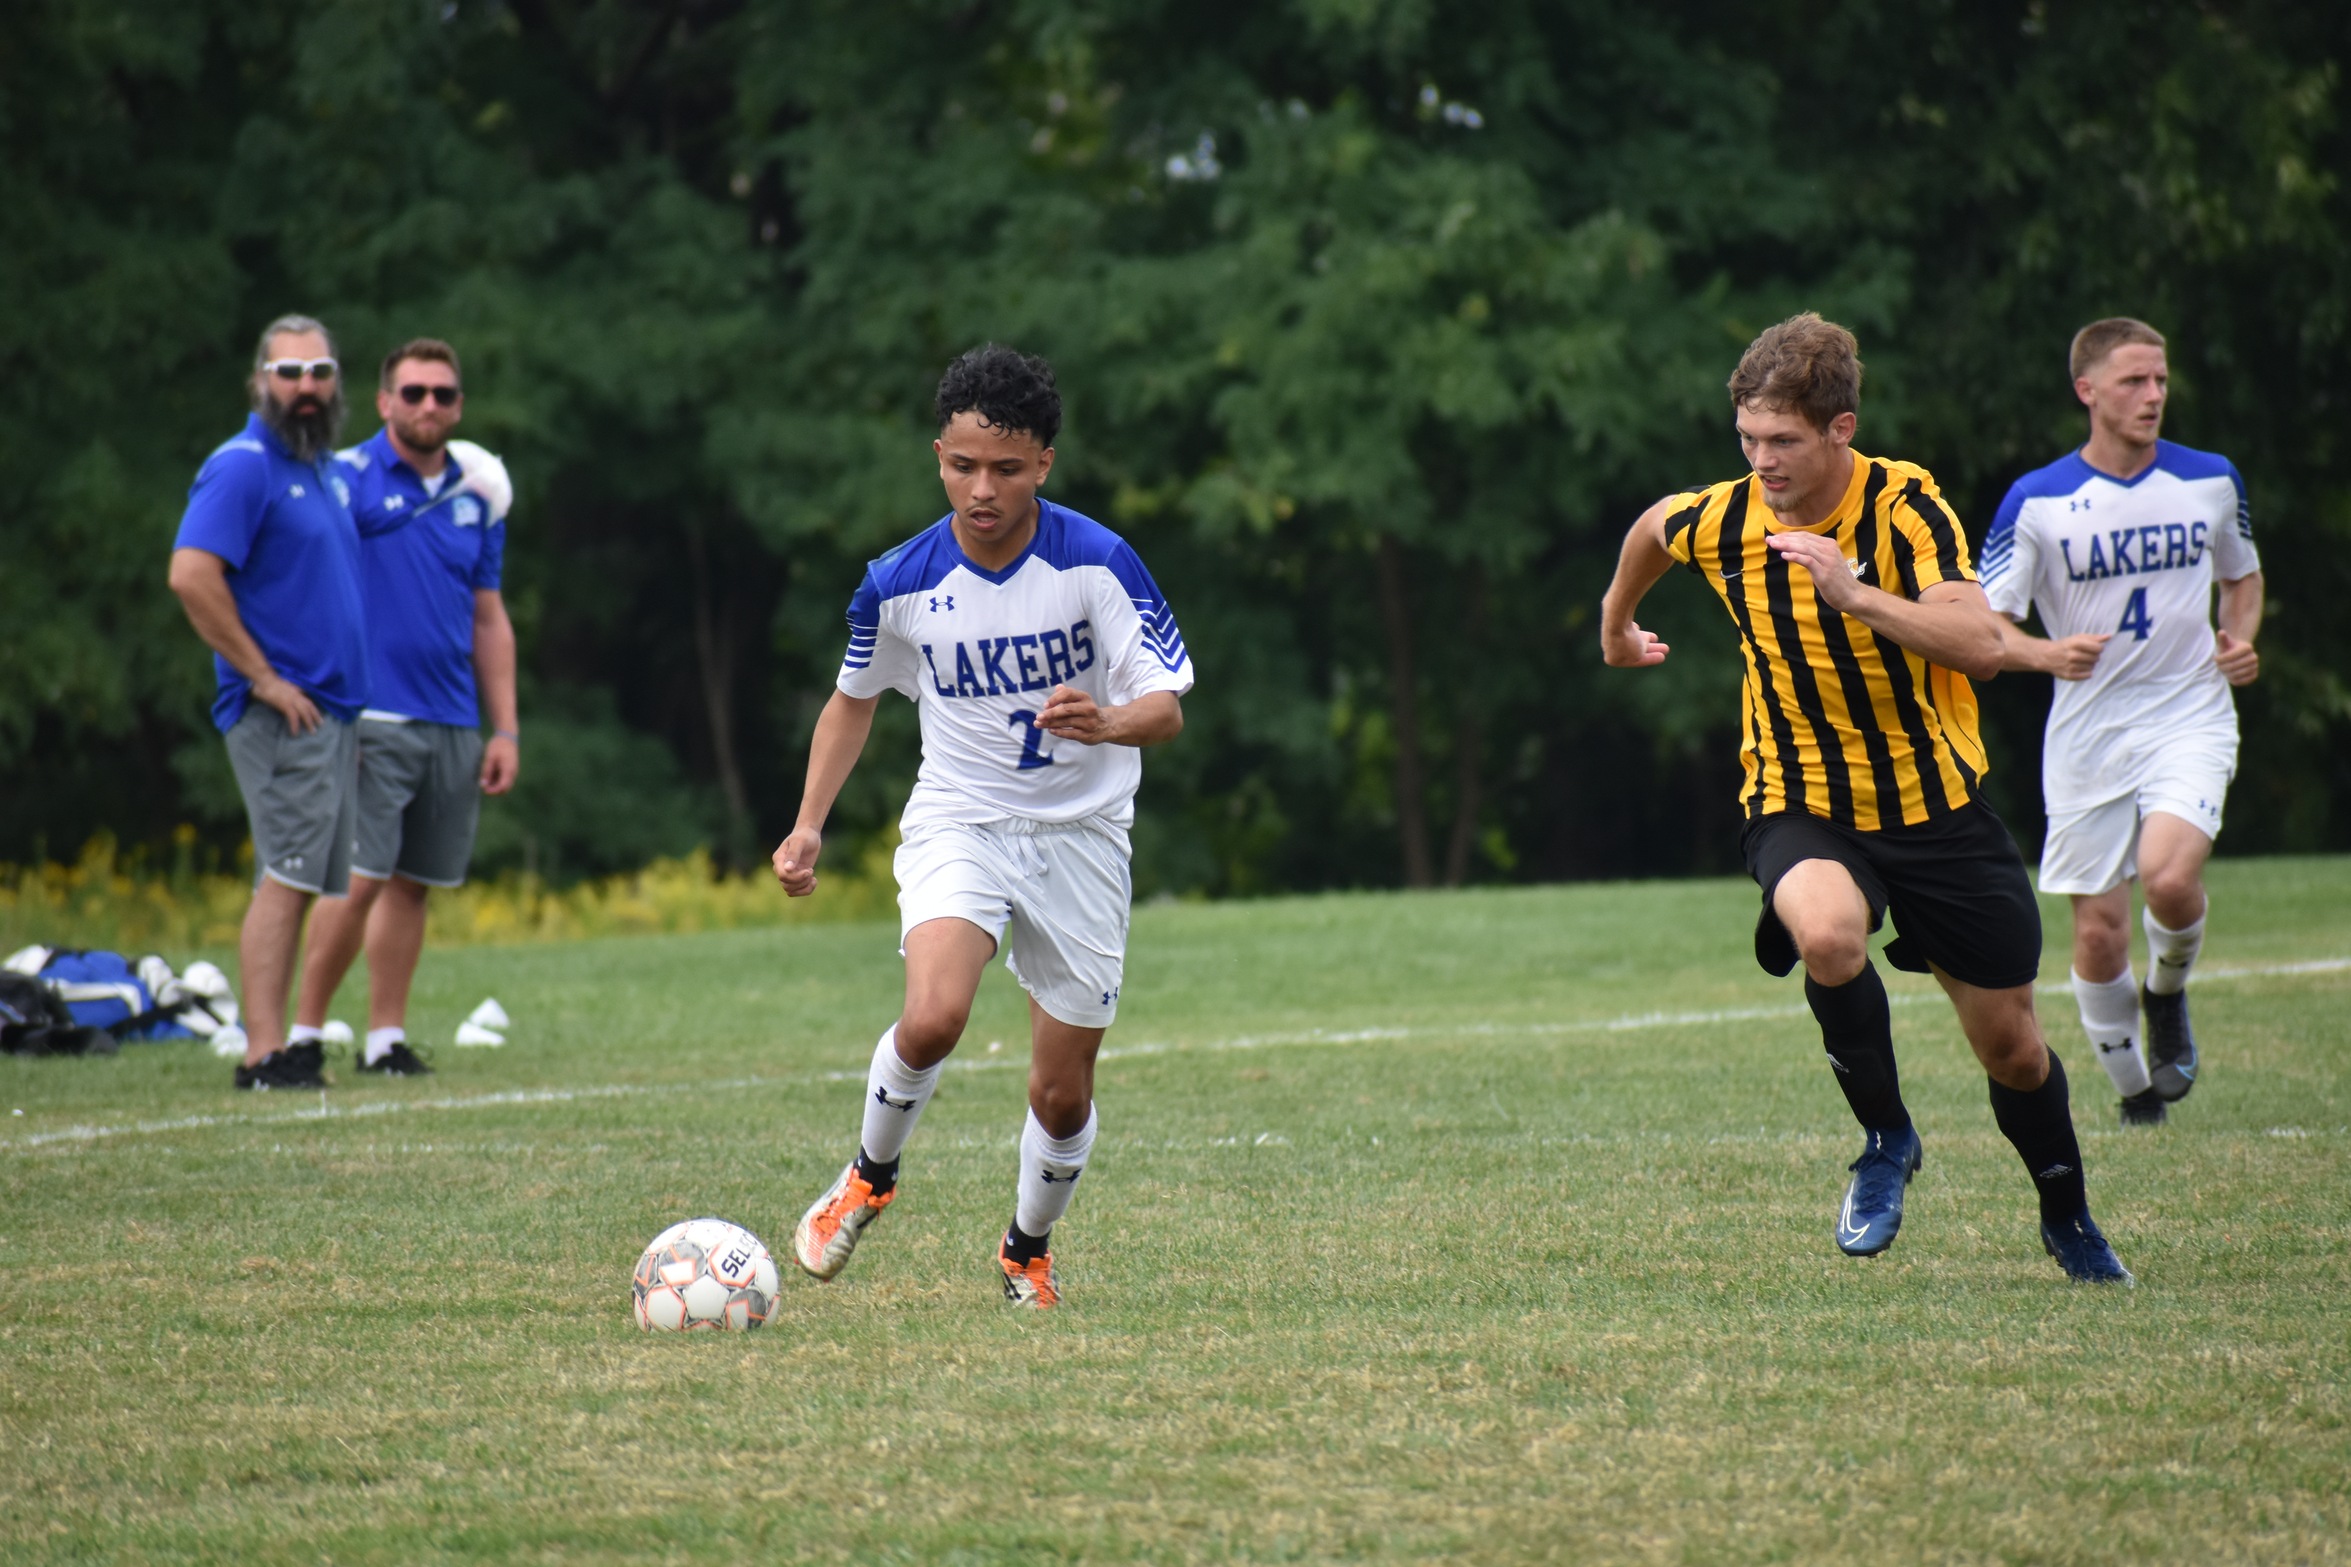 Lakers men's soccer tripped up by Ocelots